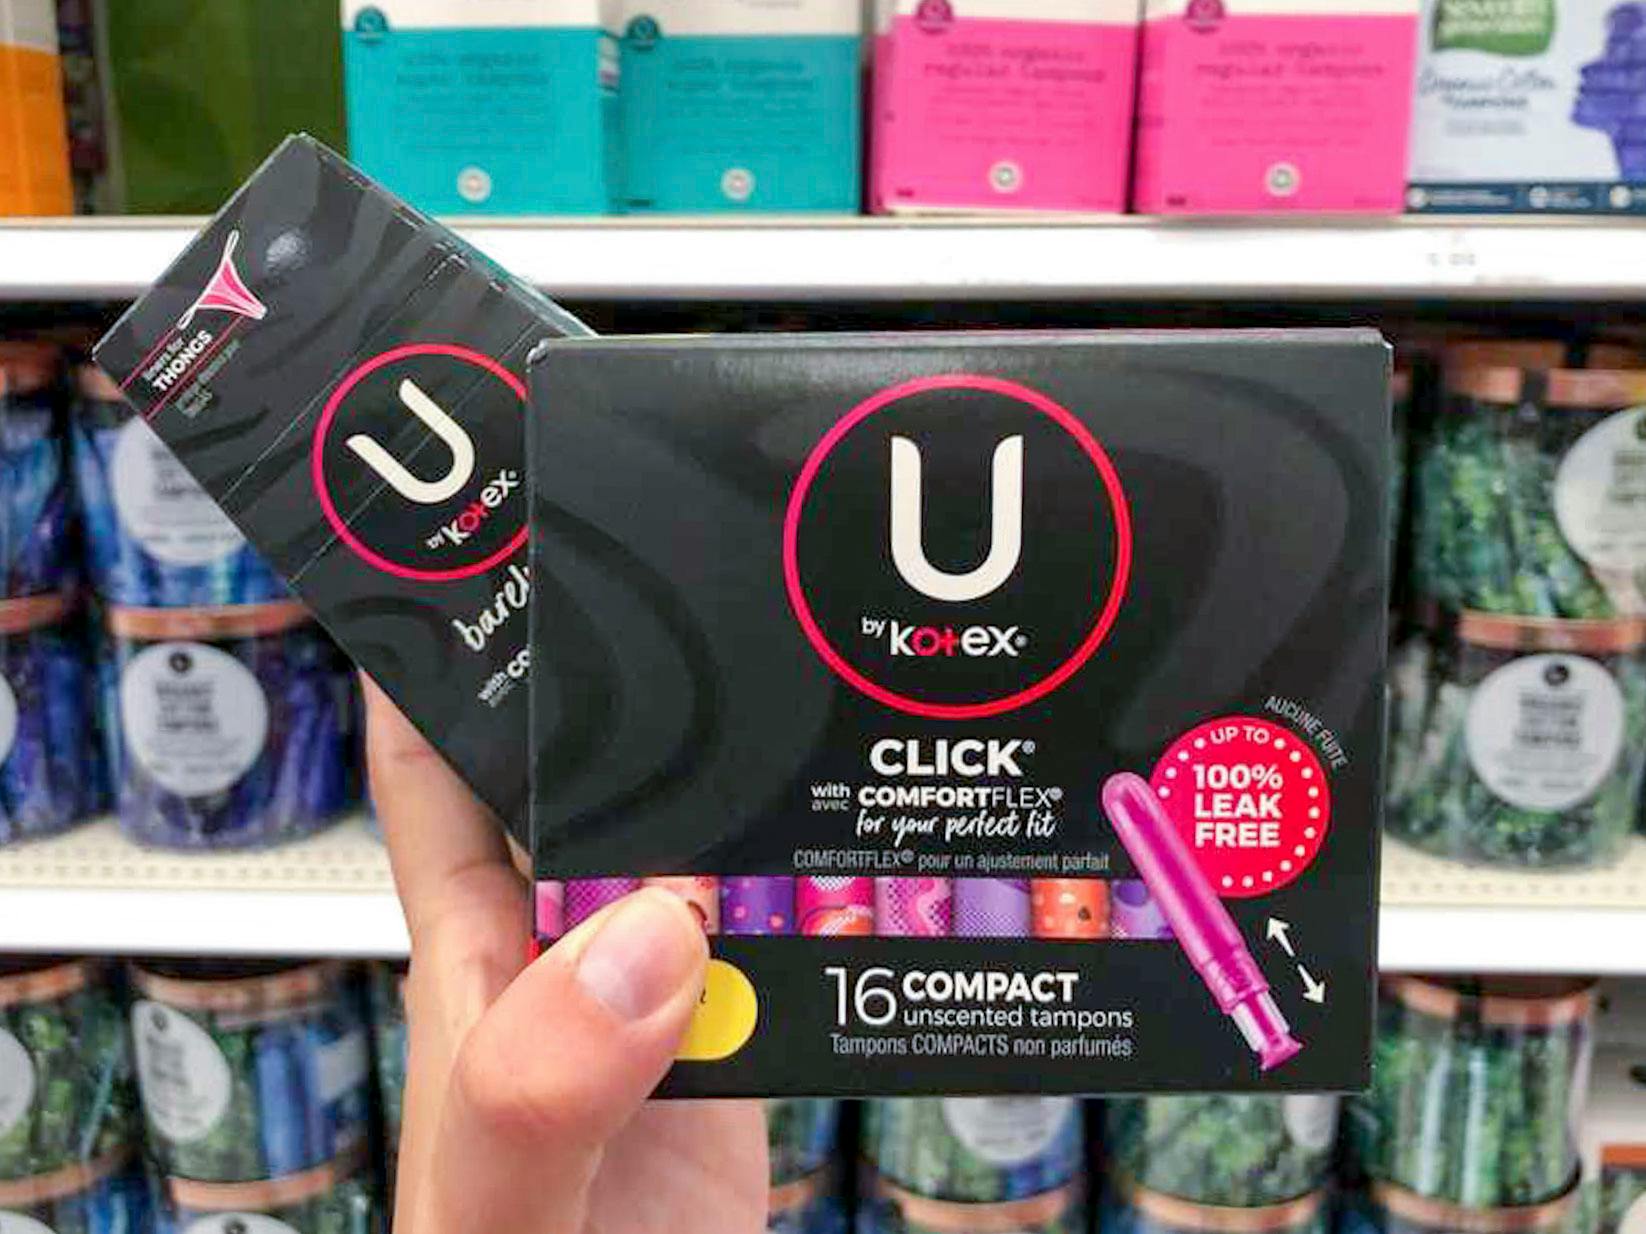 U by Kotex tampons and pads held in a woman's hand in front of a shelf at Target